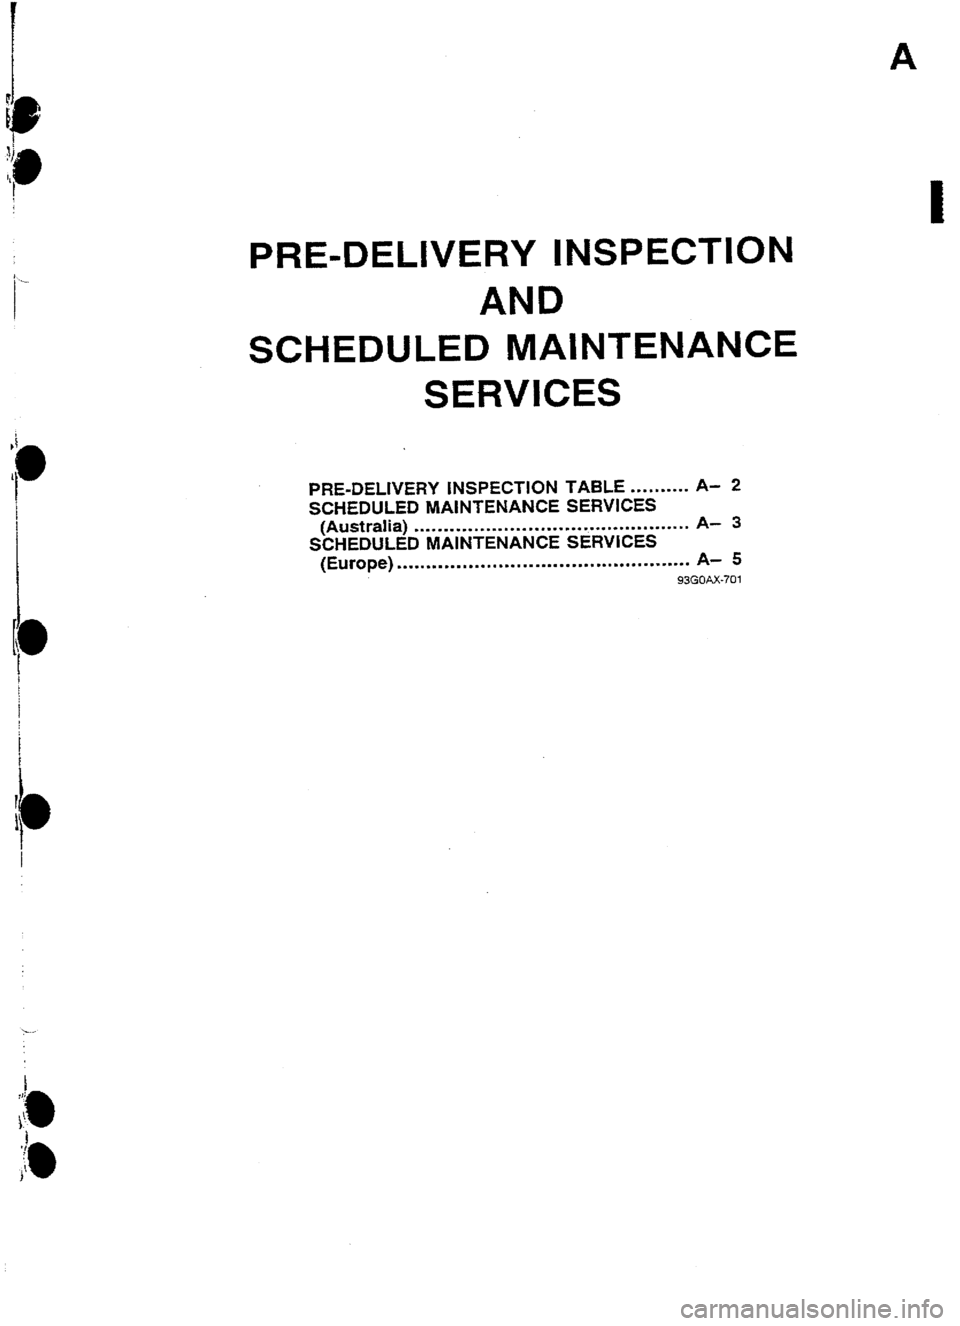 MAZDA 232 1990   Suplement User Guide 1 
I PRE-DELIVERY INSPECTION 
AND 
SCHEDULED MAINTENANCE 
SERVICES 
PRE-DELIVERY INSPECTION TA8LE ..-*...a.. A- 2 
SCflEDULED MAiNTENANCE SERVICES 
(Australia) 
. ..* . . . . . . . l . . . . . . . . .